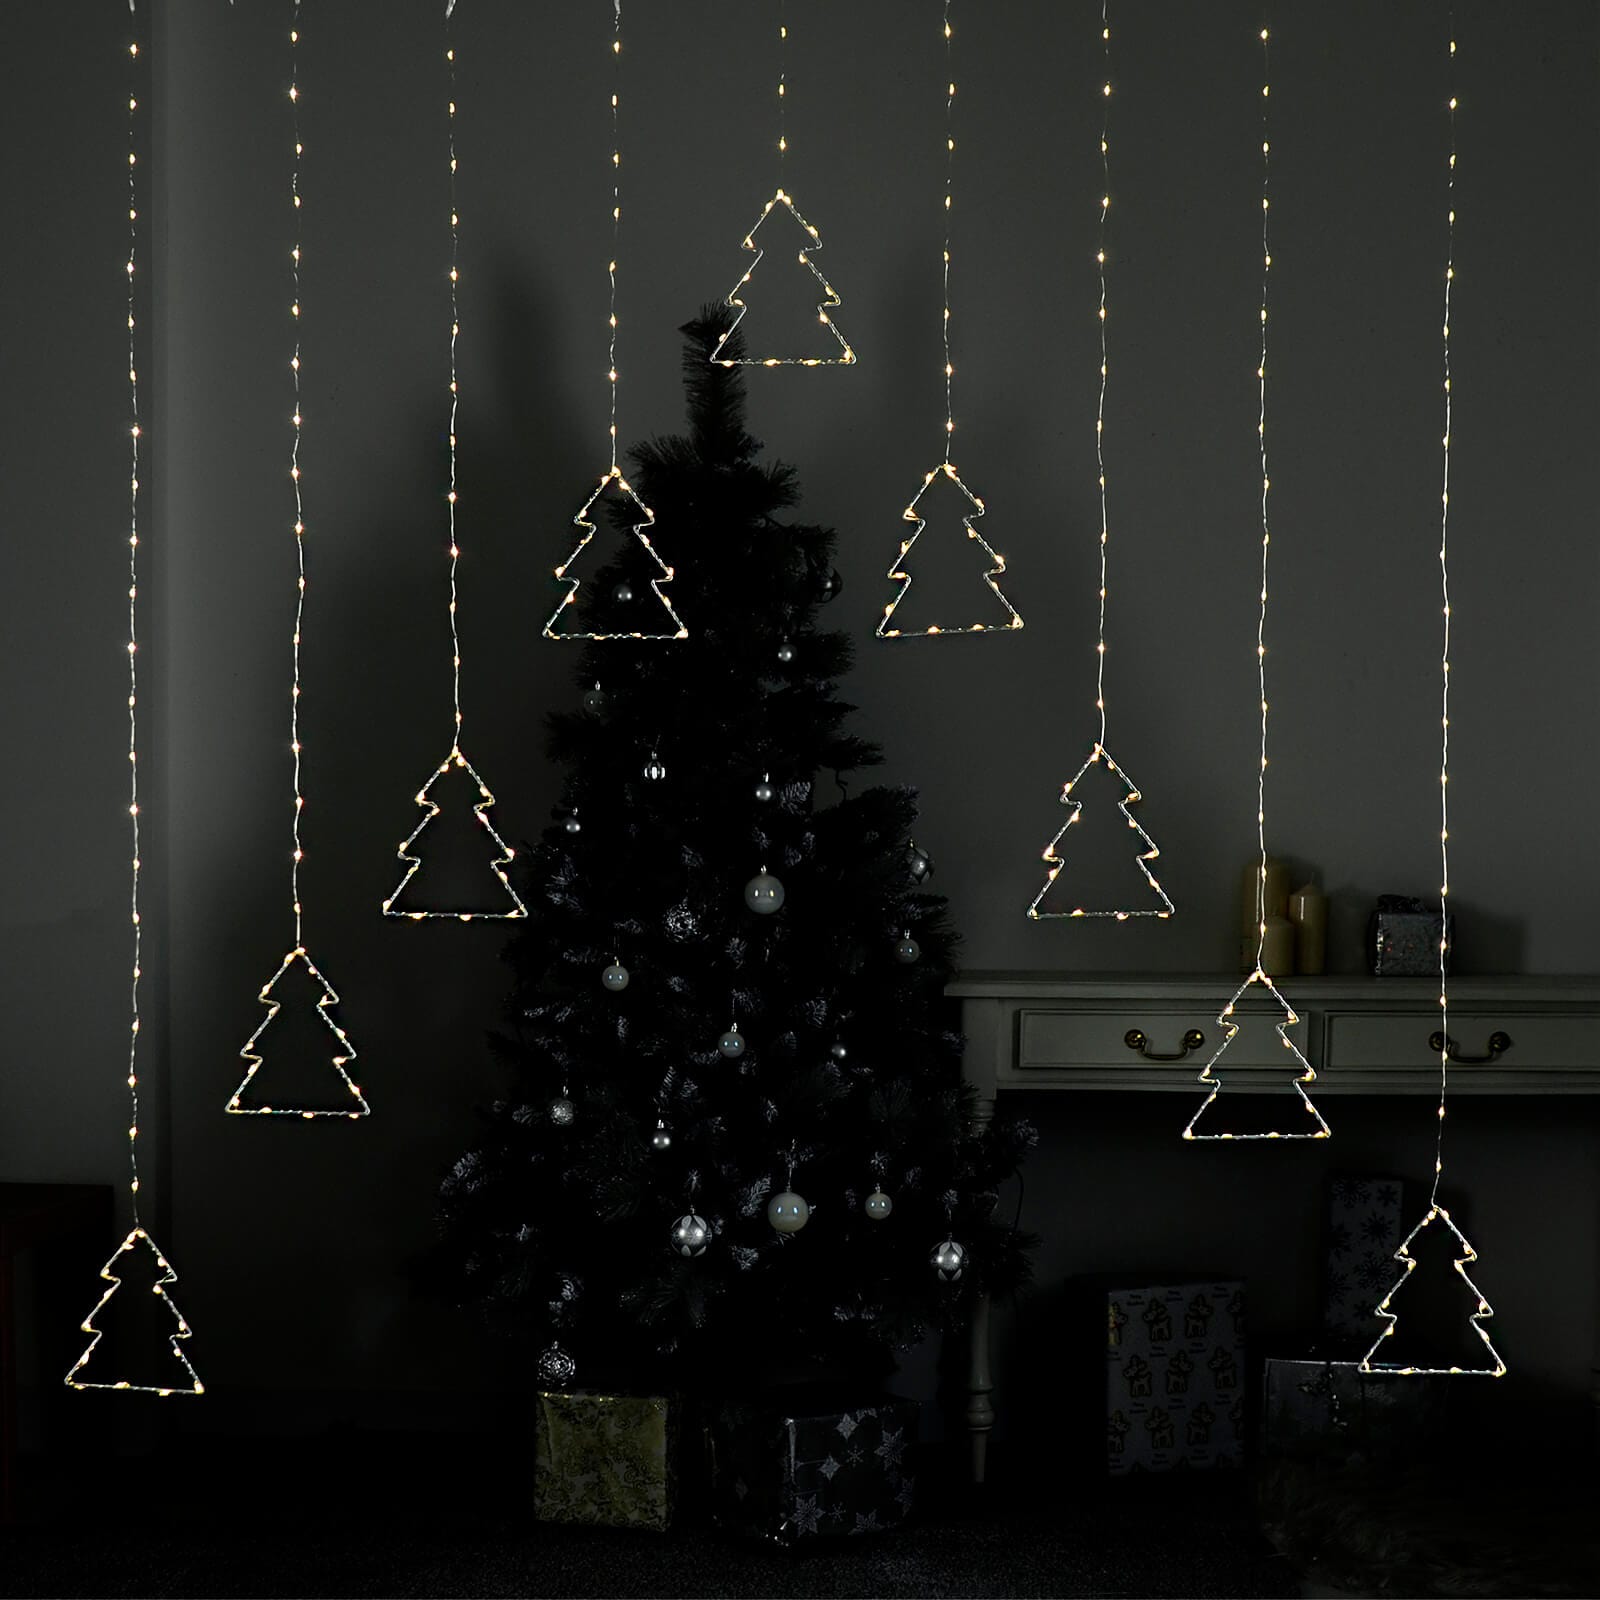 Christmas curtain light with 9 Christmas tree shapes lit by warm white LED lights, hanging in front of a Christmas tree and presents